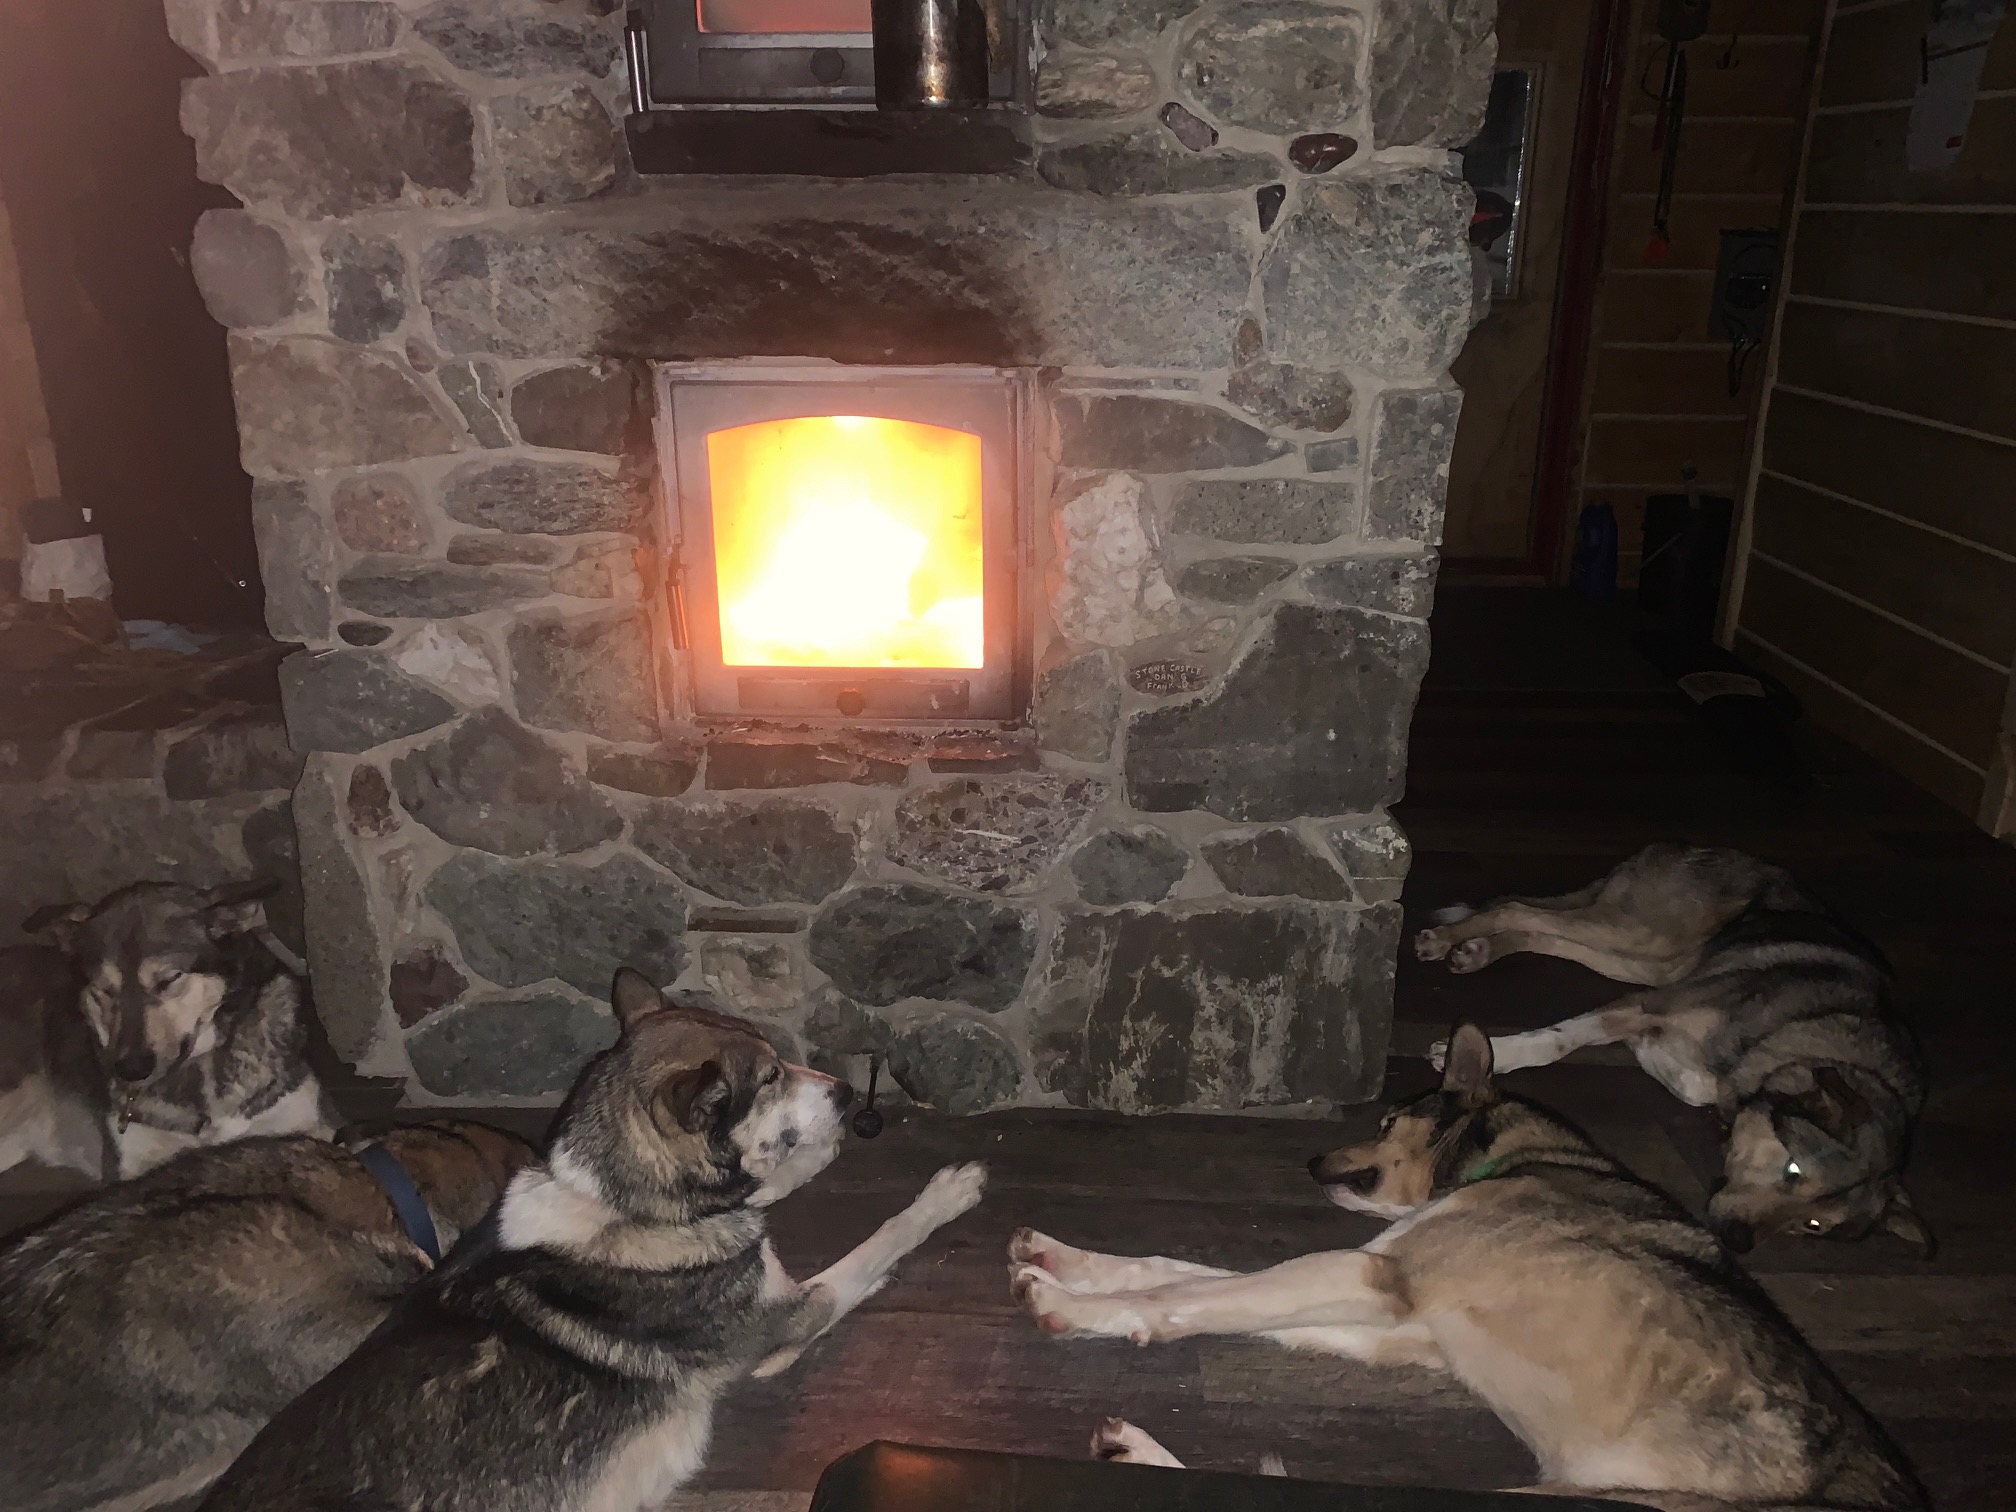 Five sled dogs relax by a woodstove. Photo by Andrew Bassich